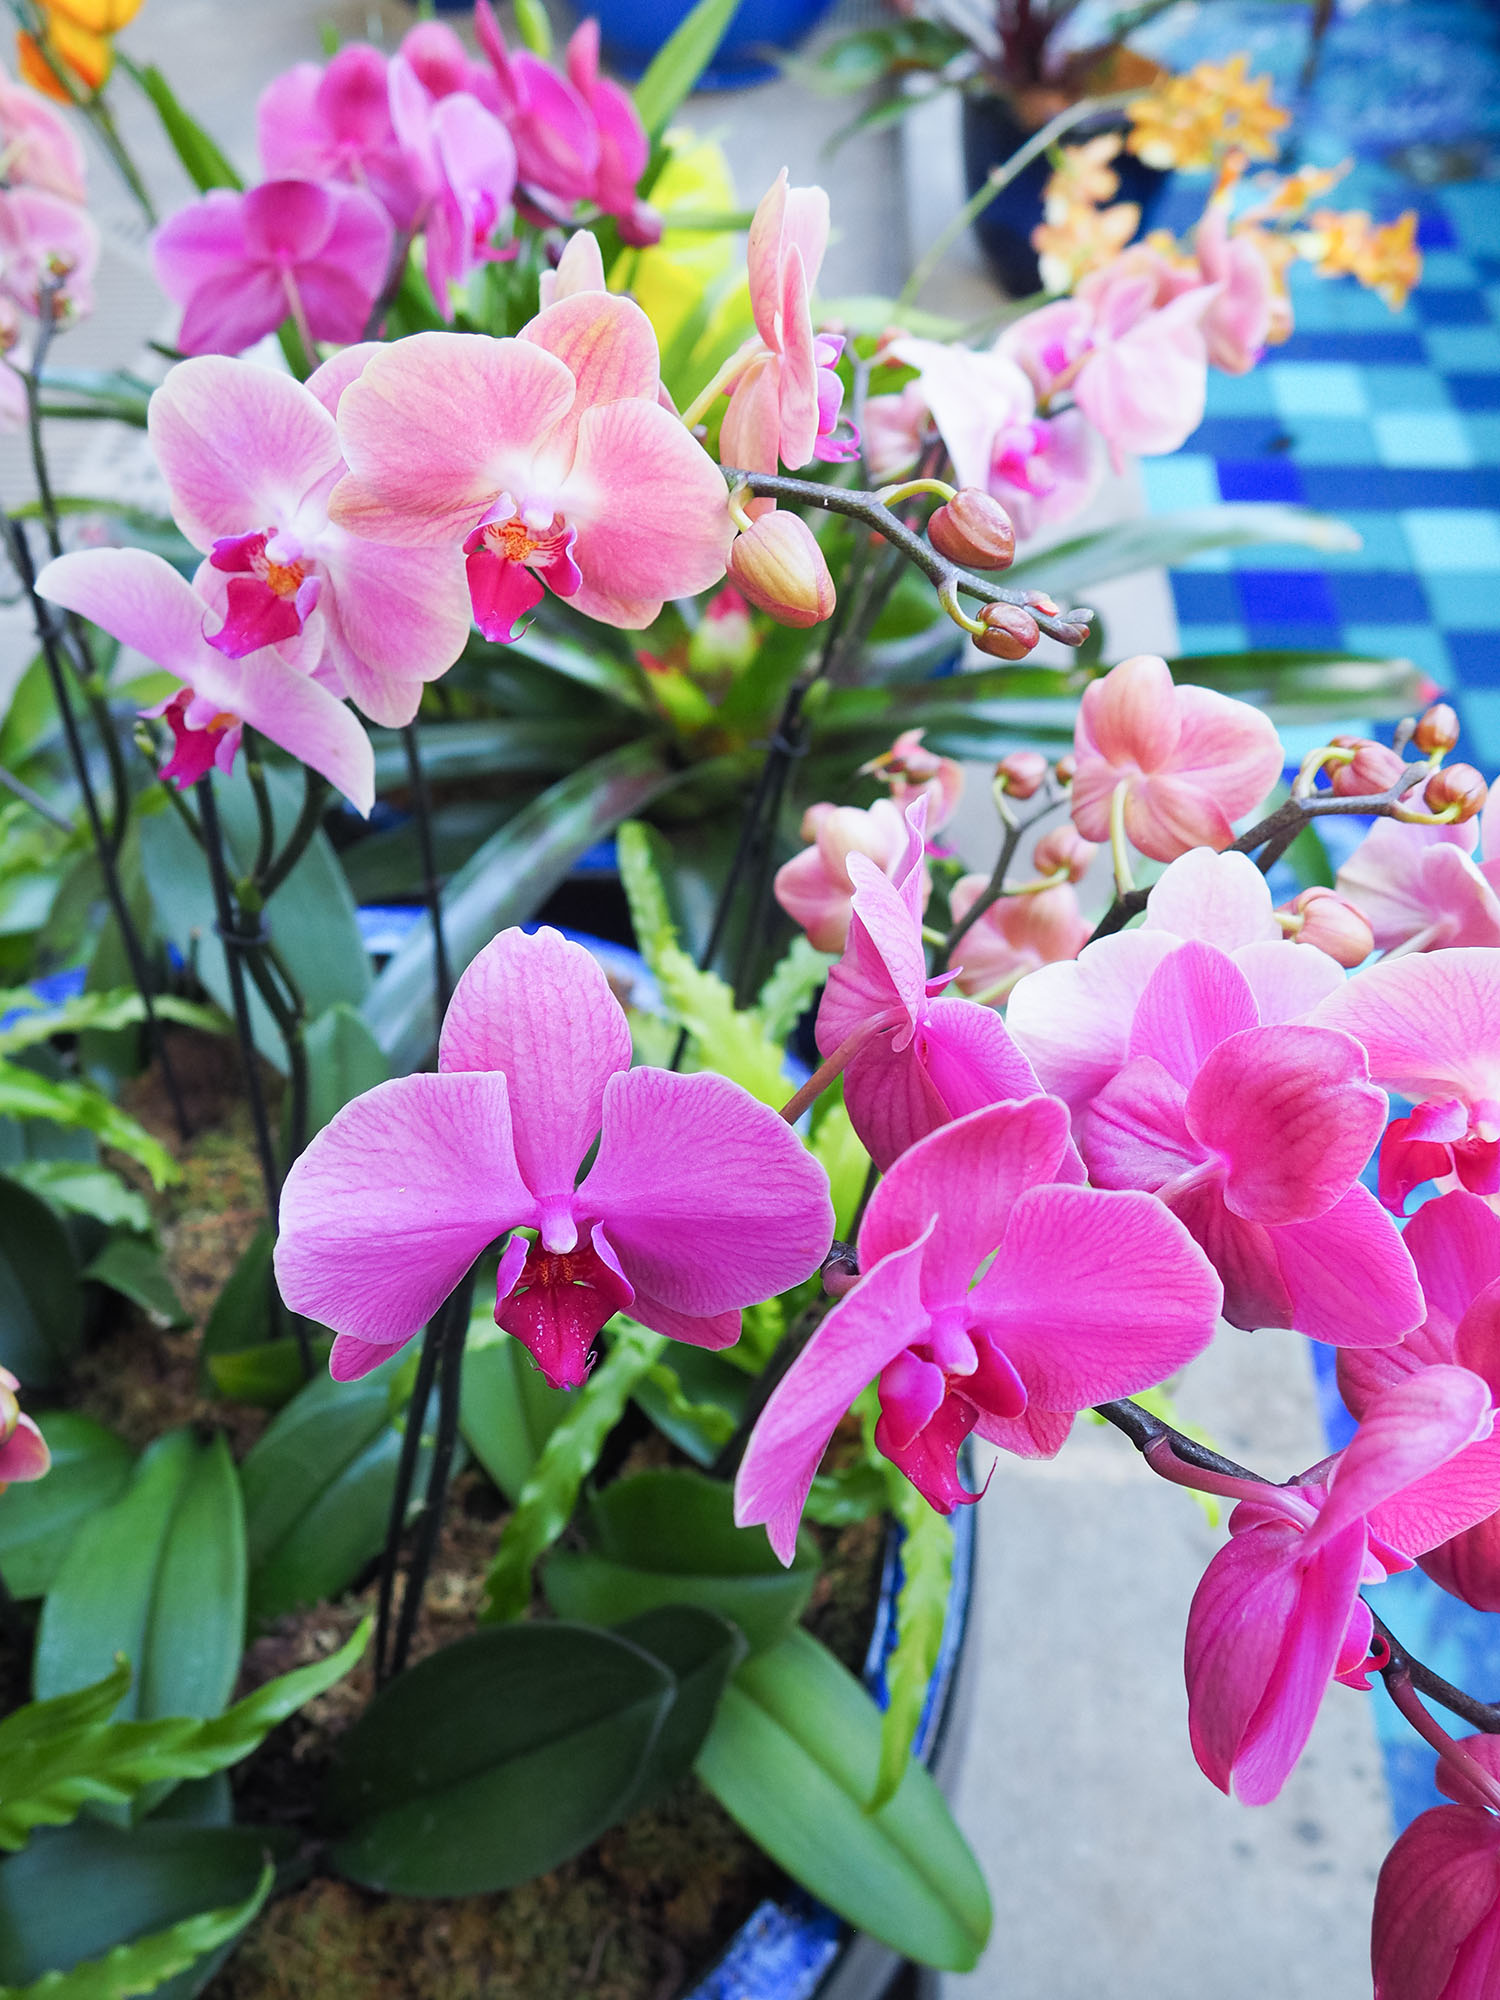 Vibrant pink orchids grow at the United States Botanic Garden, photographed by Canadian travel blogger Cee Fardoe of Coco & Vera